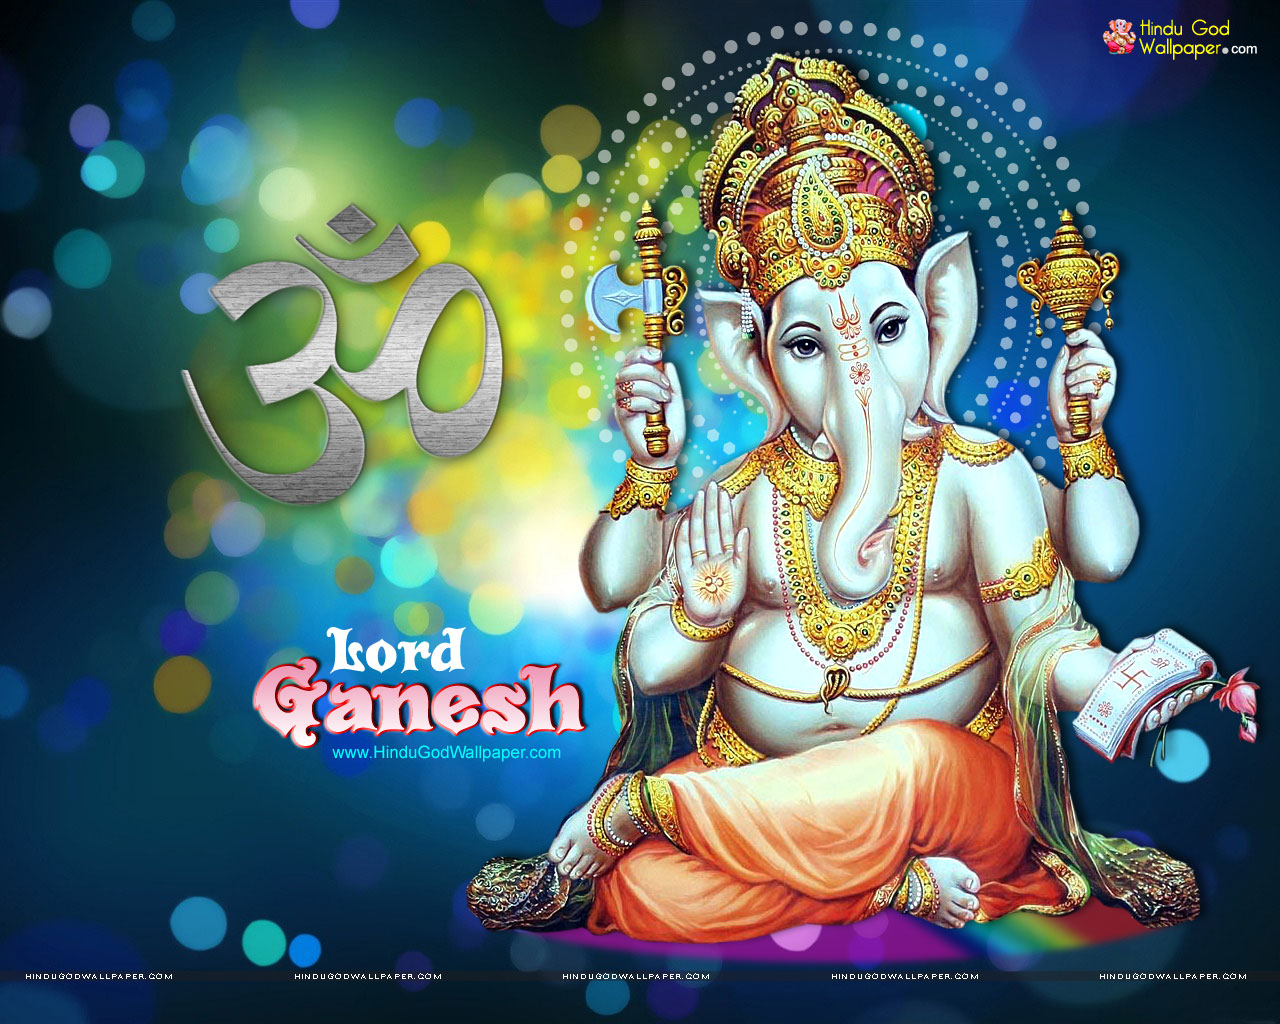 Shree Ganesh Wallpapers & Images Galleries